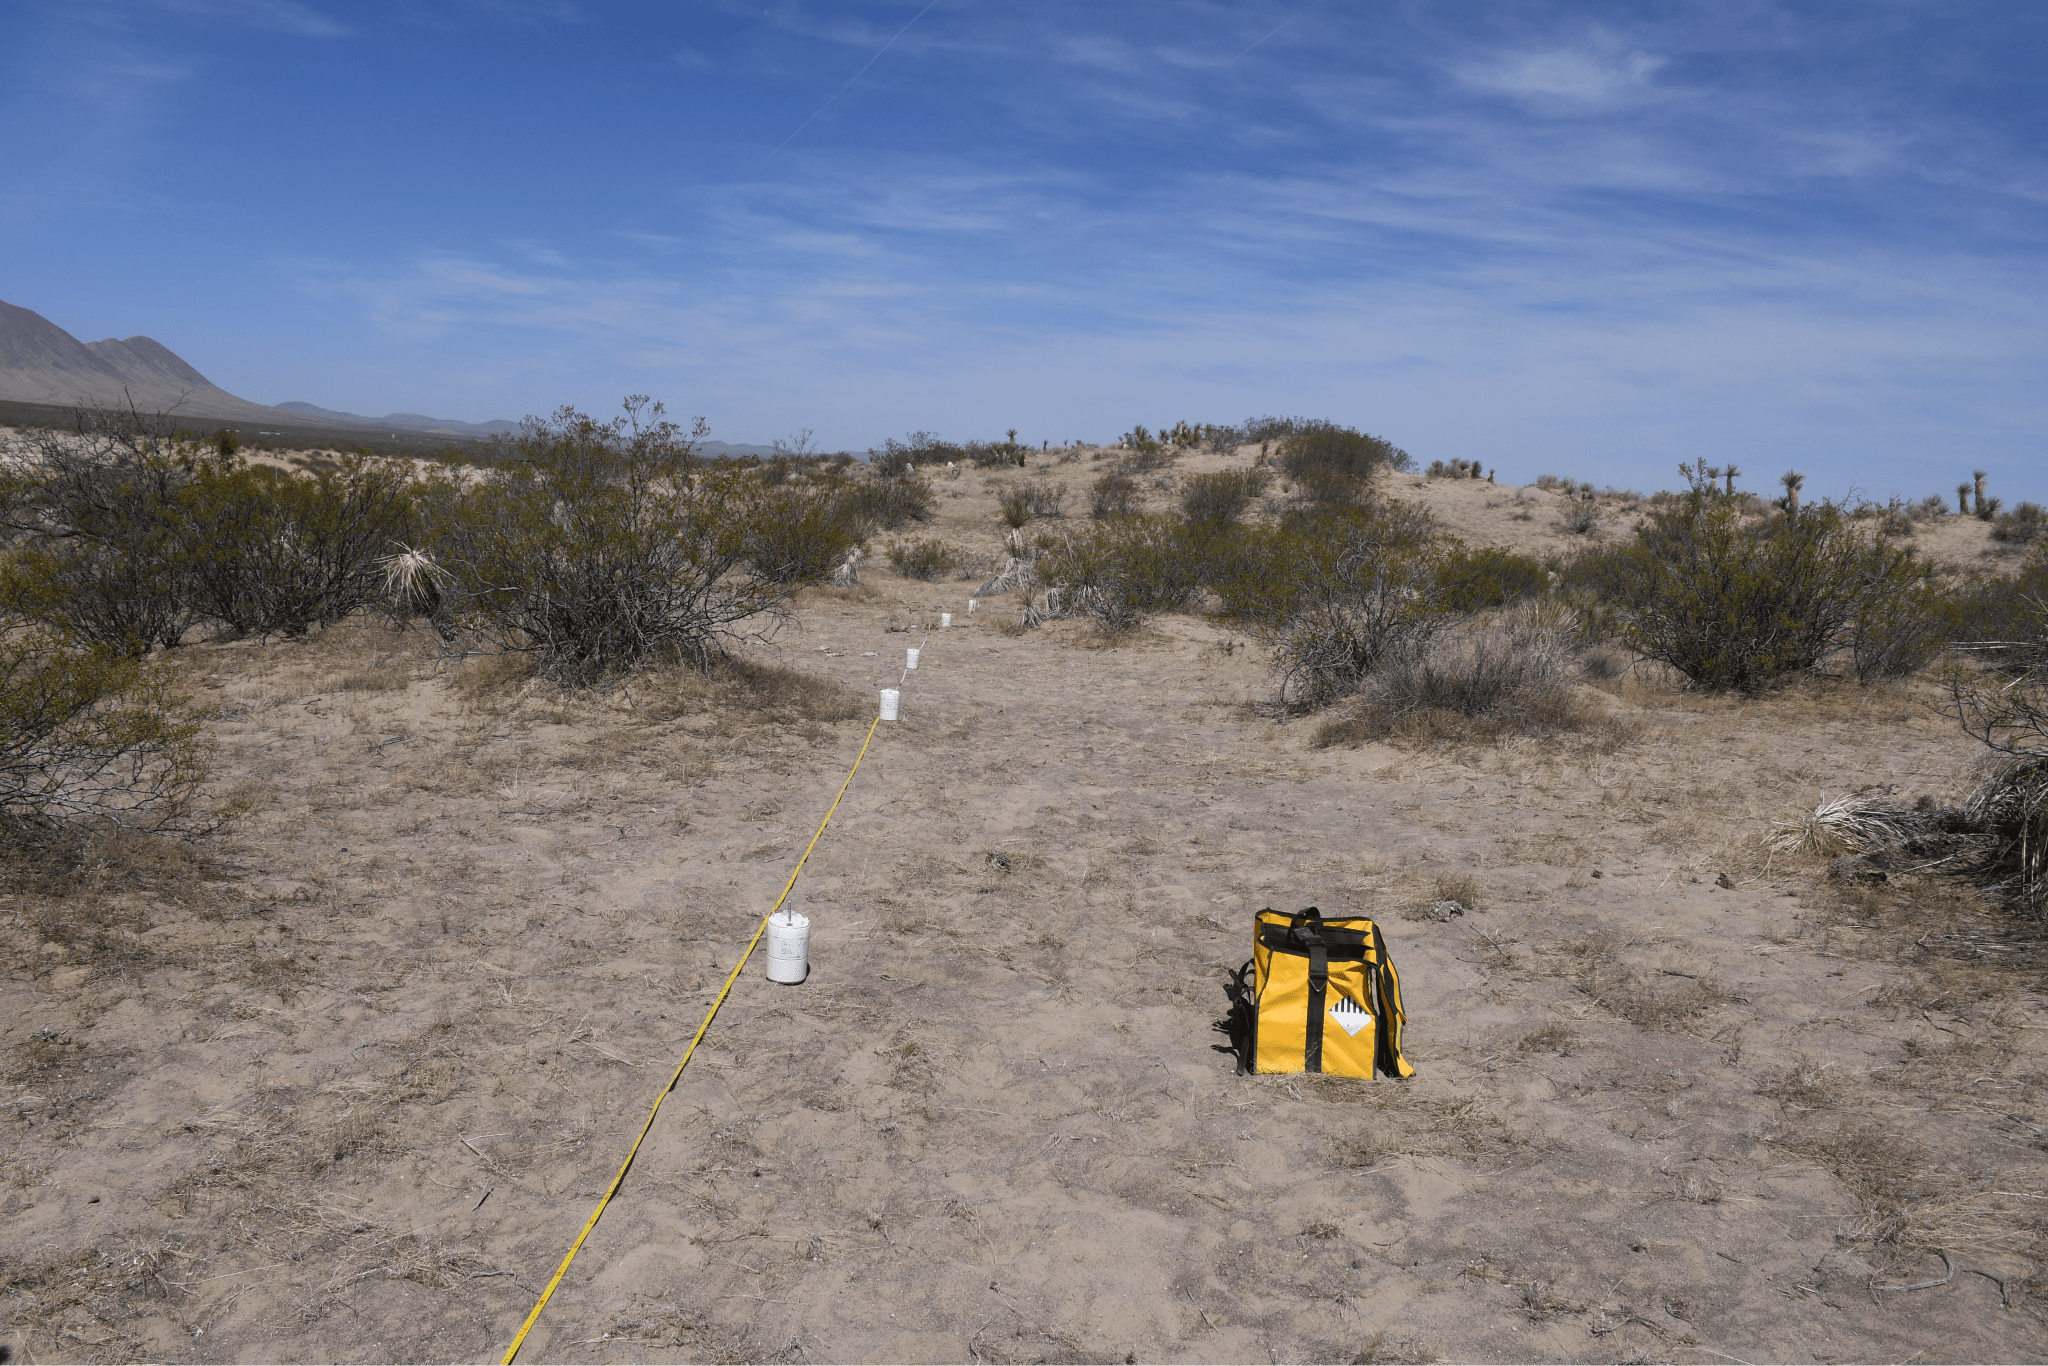 A line of geophones helps measure seismic activity at Potrillo Volcanic Filed in New Mexico, April 2022 